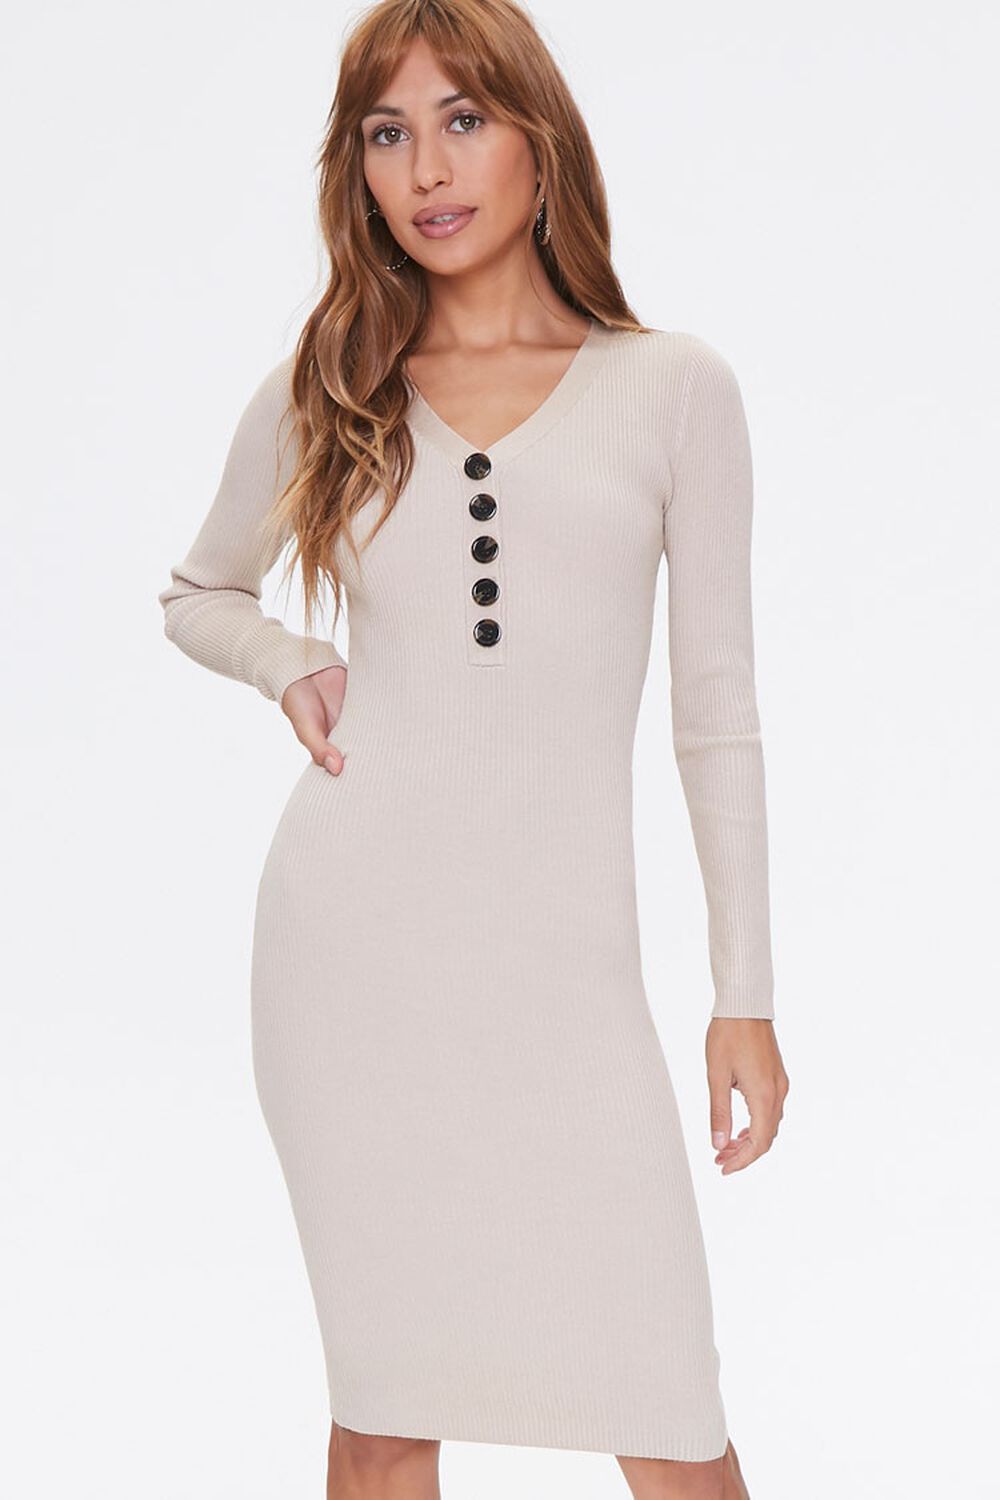 TAUPE Ribbed Sweater-Knit Dress, image 1